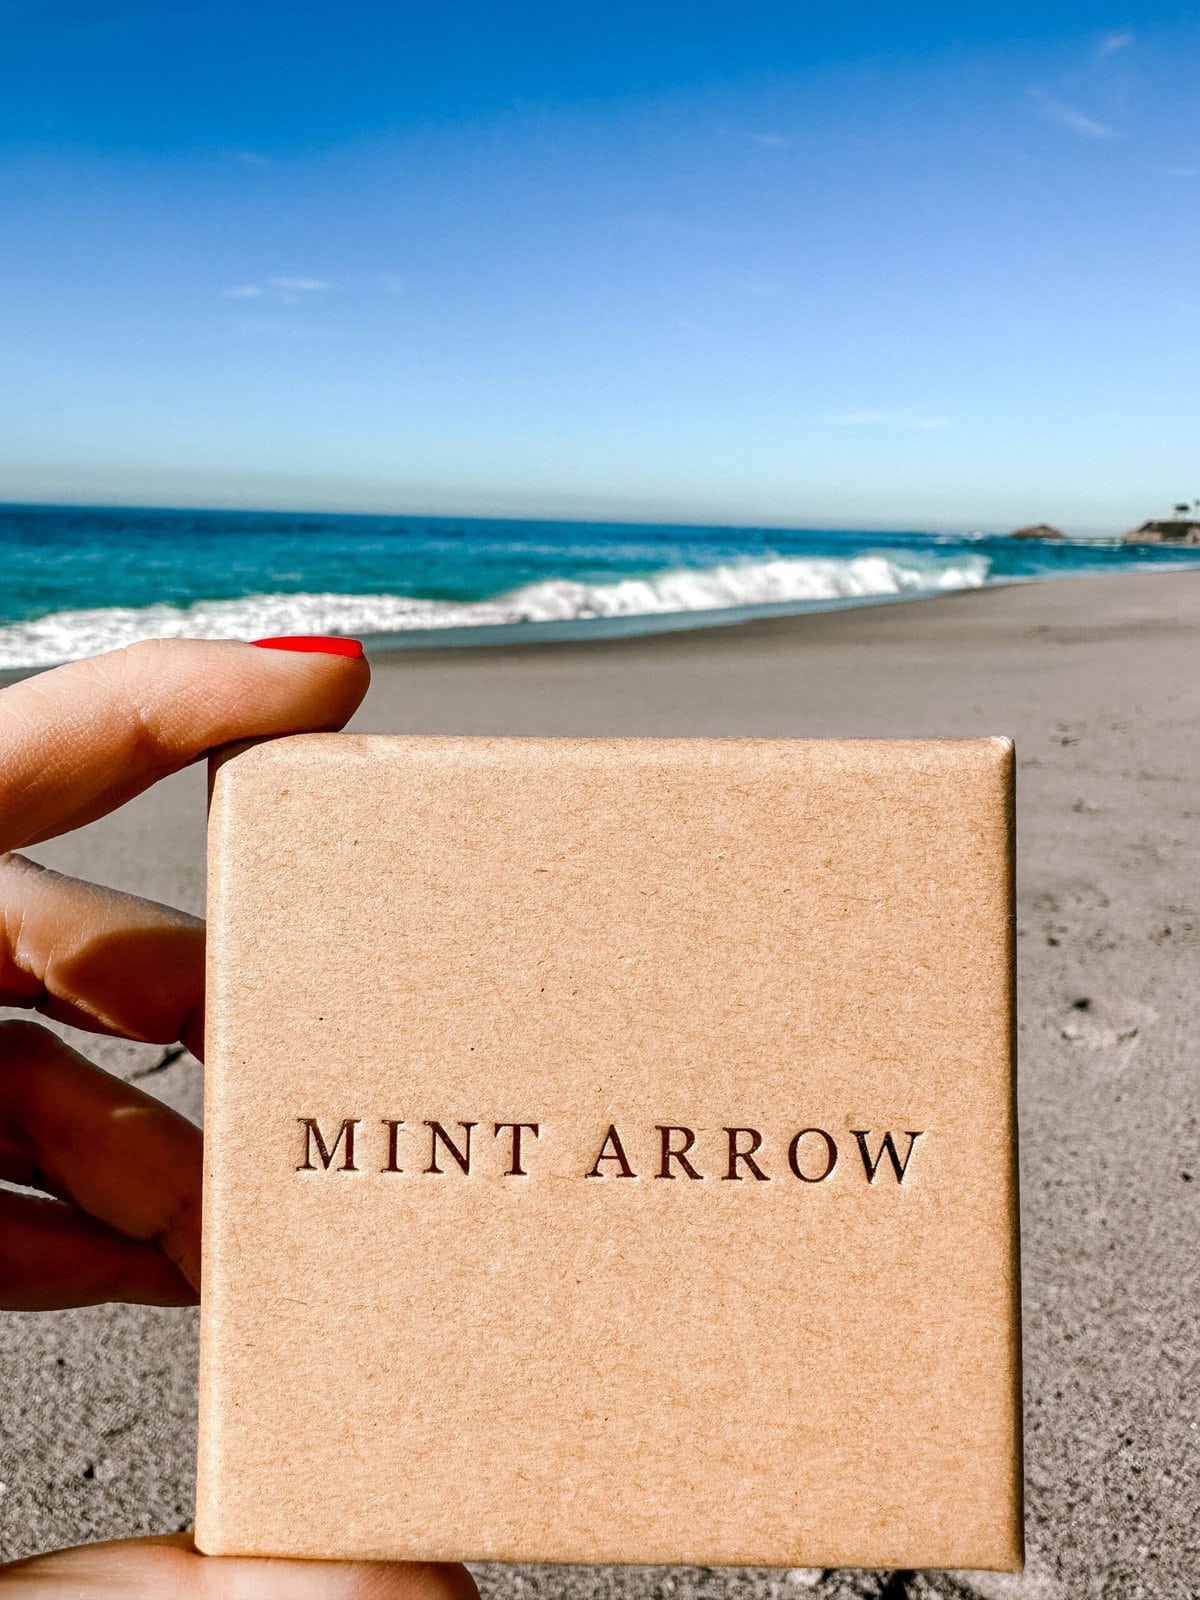 FREE SHIPPING on Mint Arrow Messages merch - gifts just in time for  Christmas! - Mint Arrow